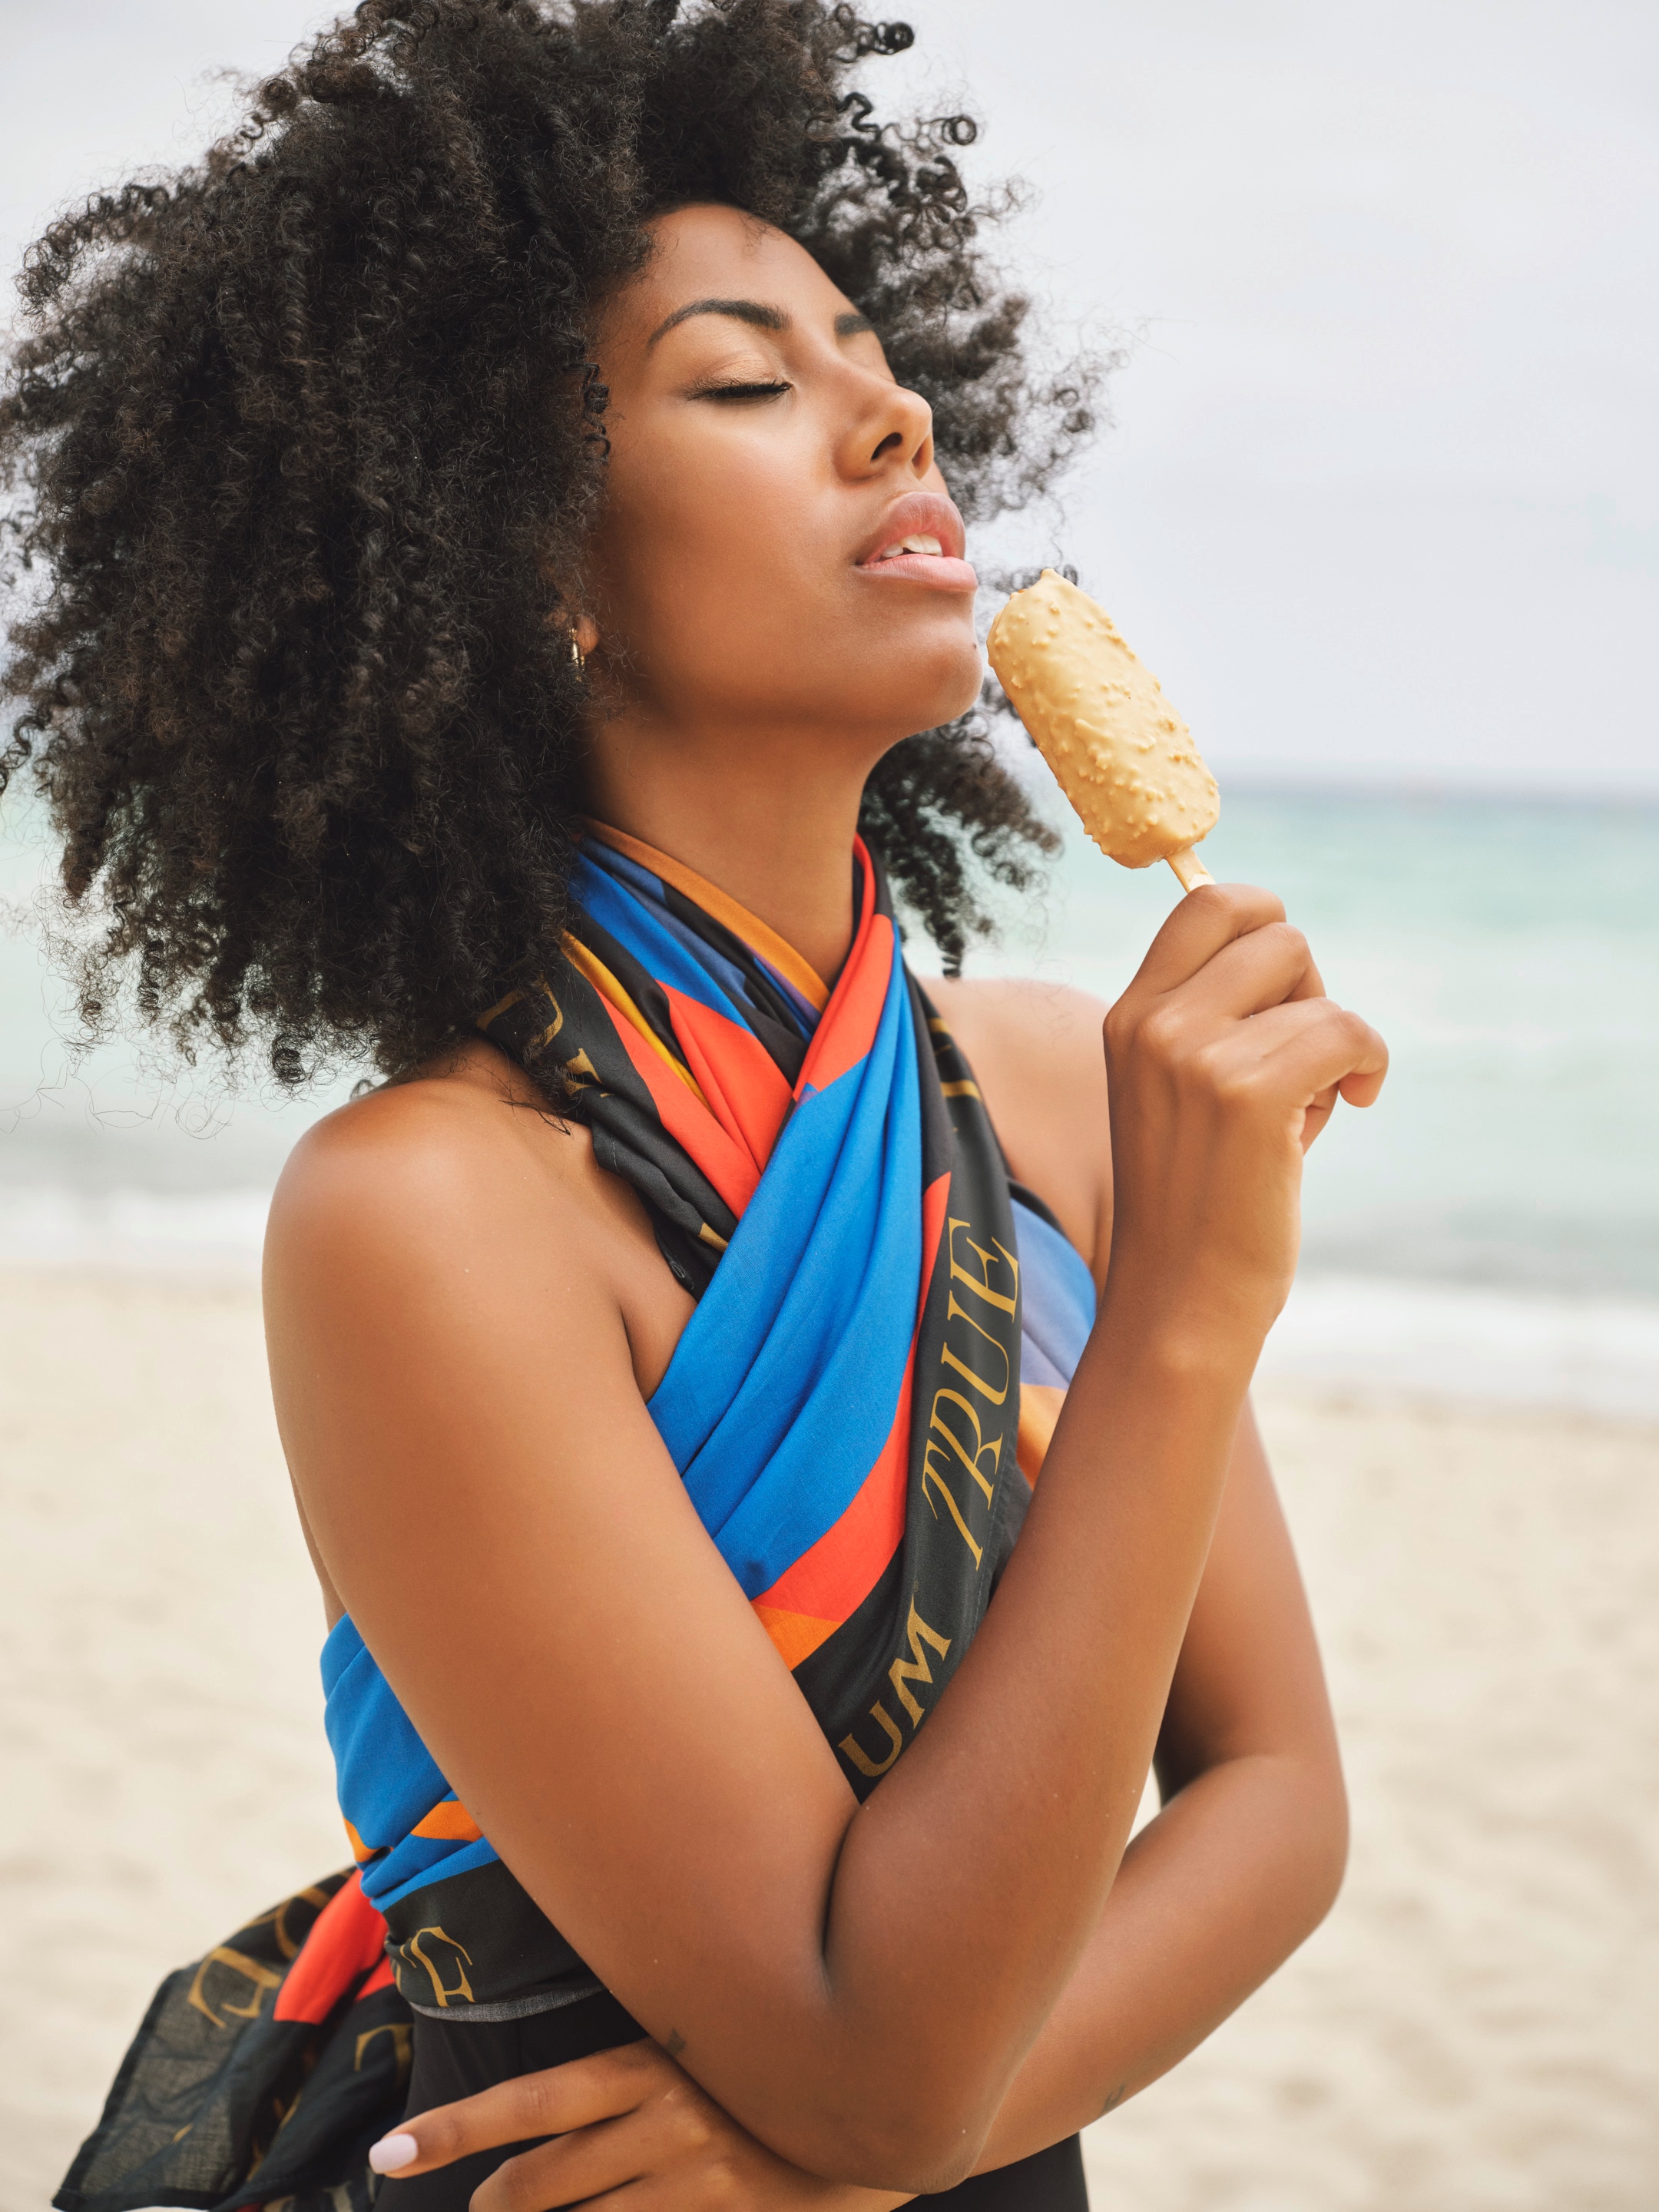 Model wearing a magnum sarong as a top while eating a Magnum ice cream